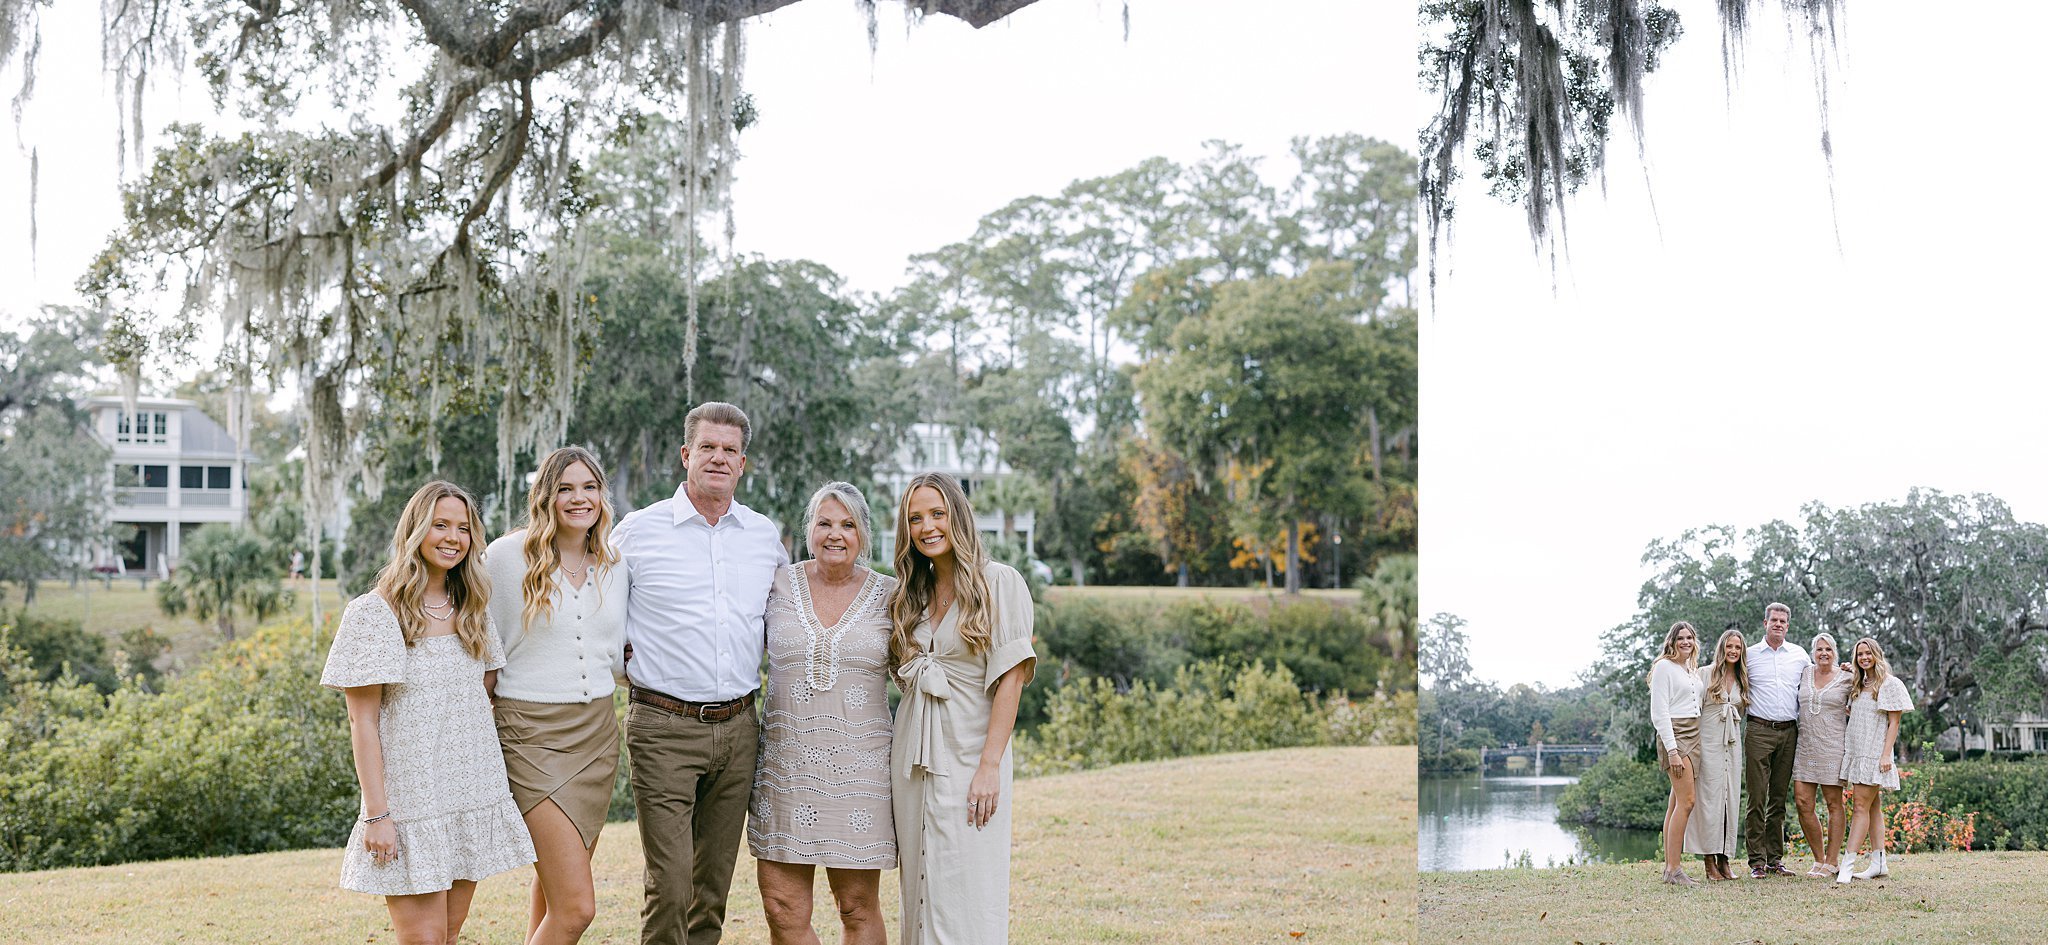 Katherine_Ives_Photography_Timmerman_Family_palmetto_bluff_35997.JPG